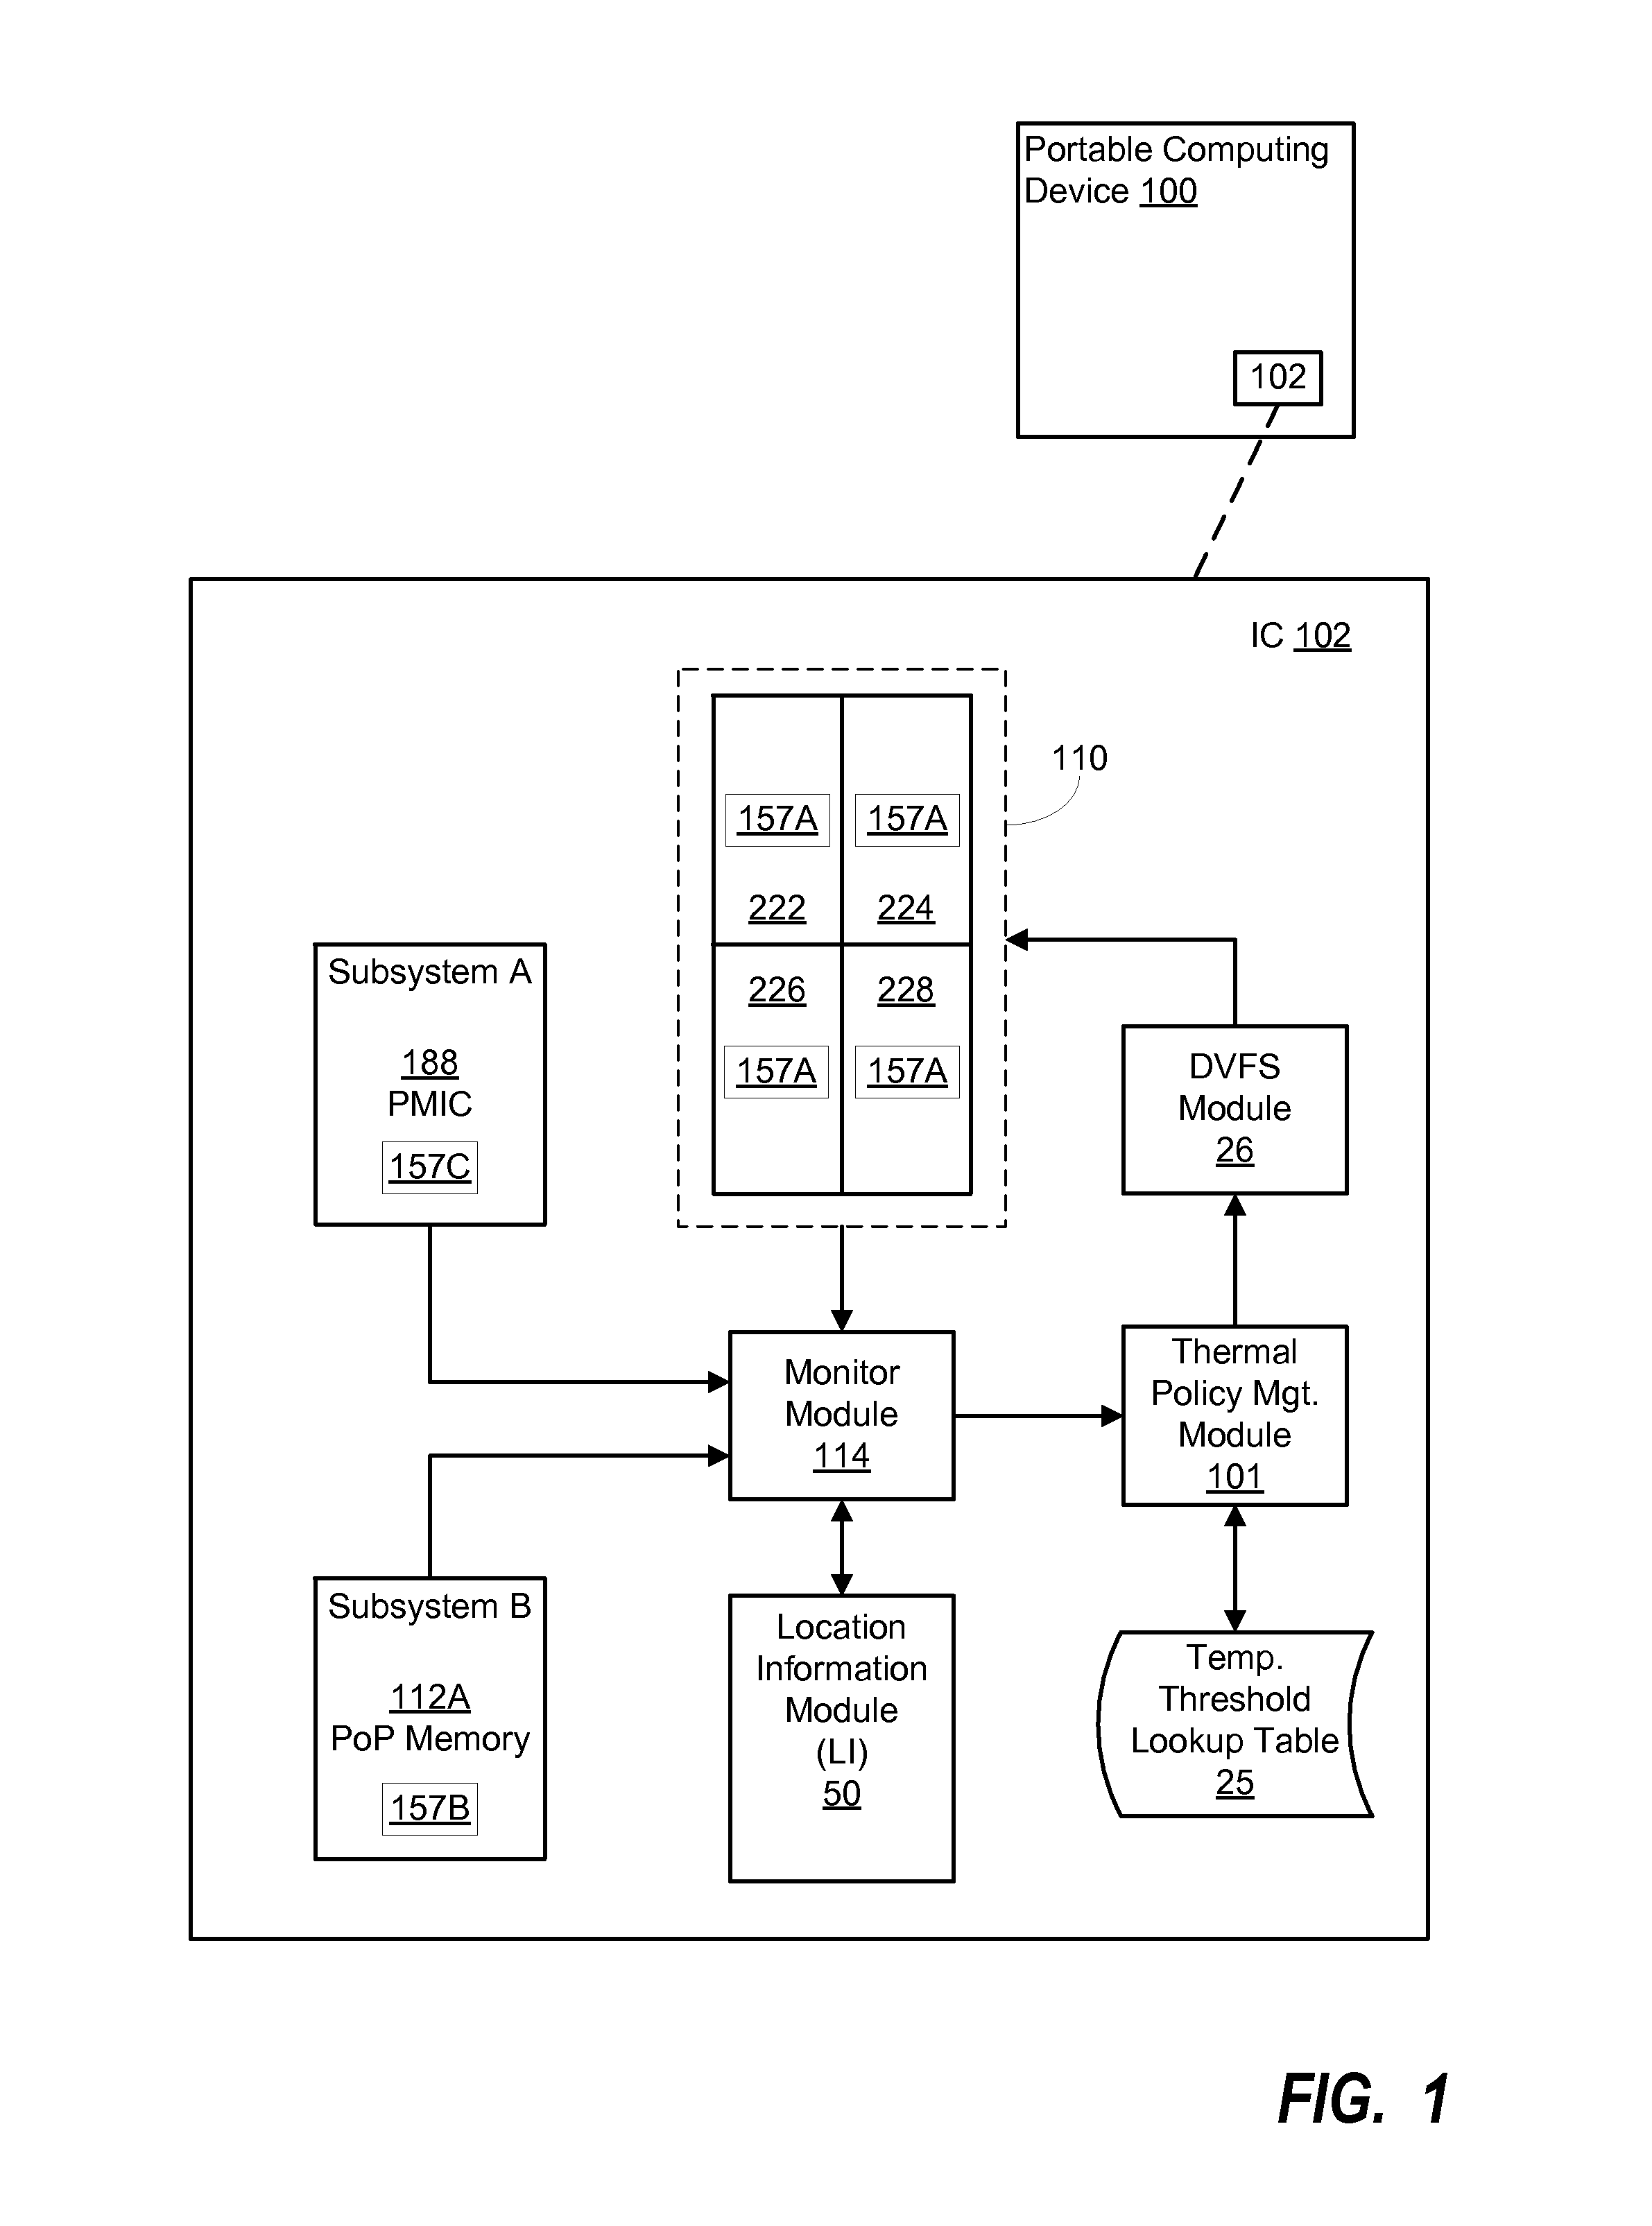 System and method for tuning a thermal strategy in a portable computing device based on location